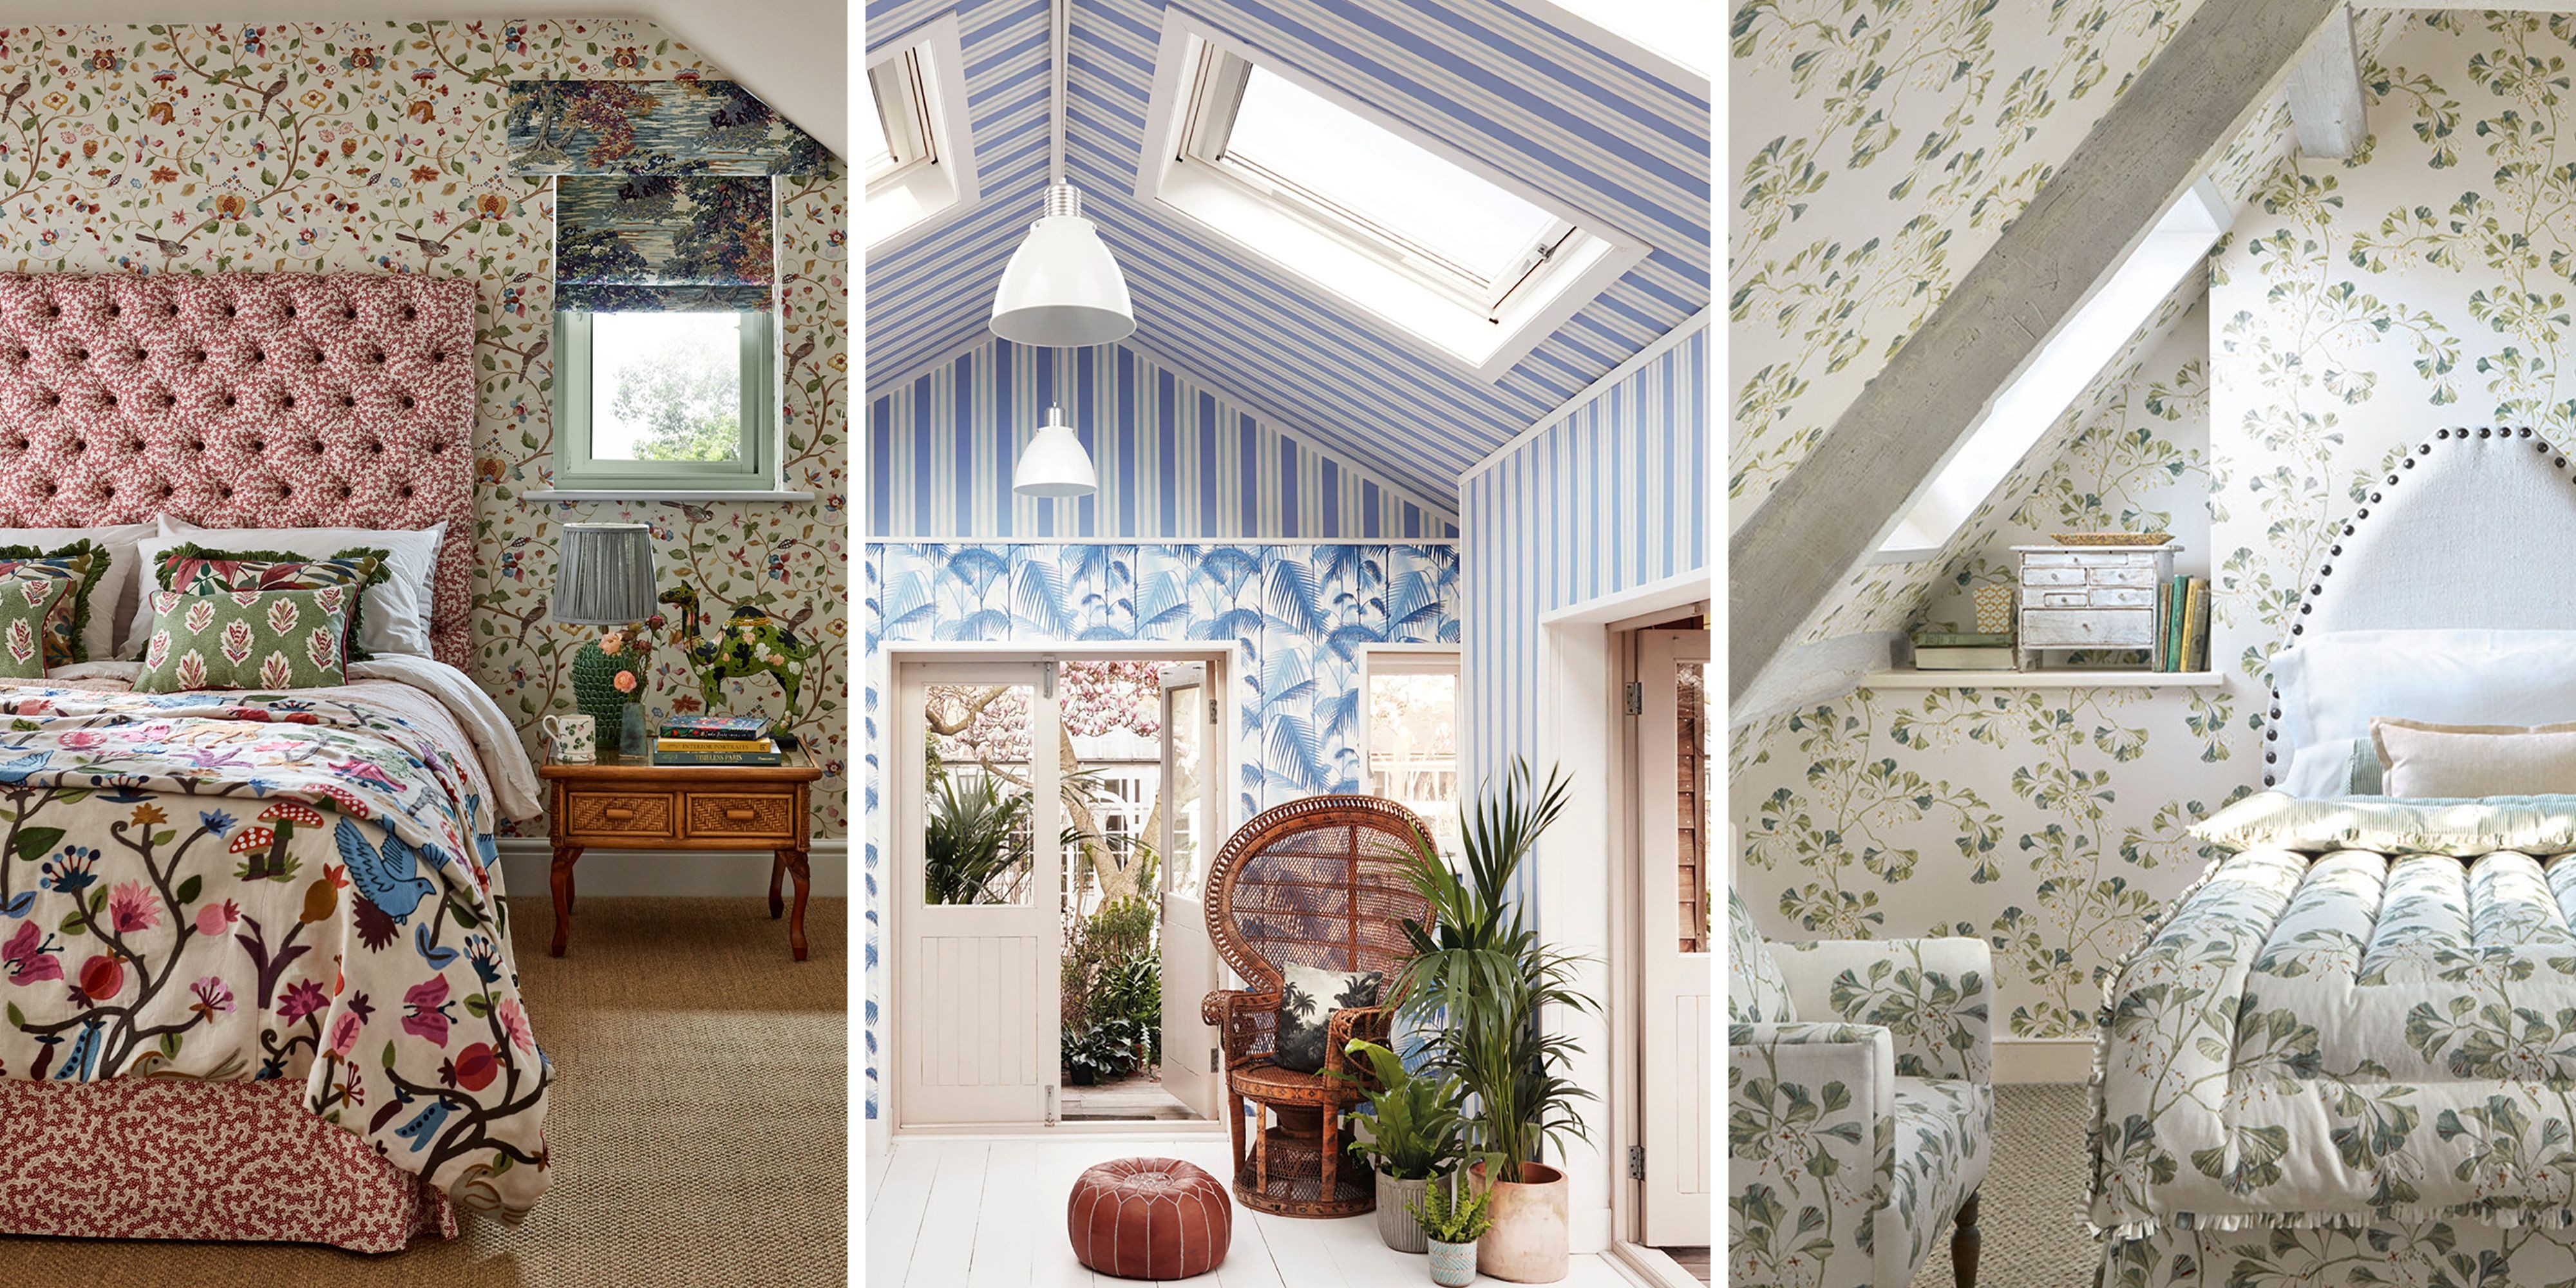 41 Bedroom Wallpaper Ideas We're Currently Coveting